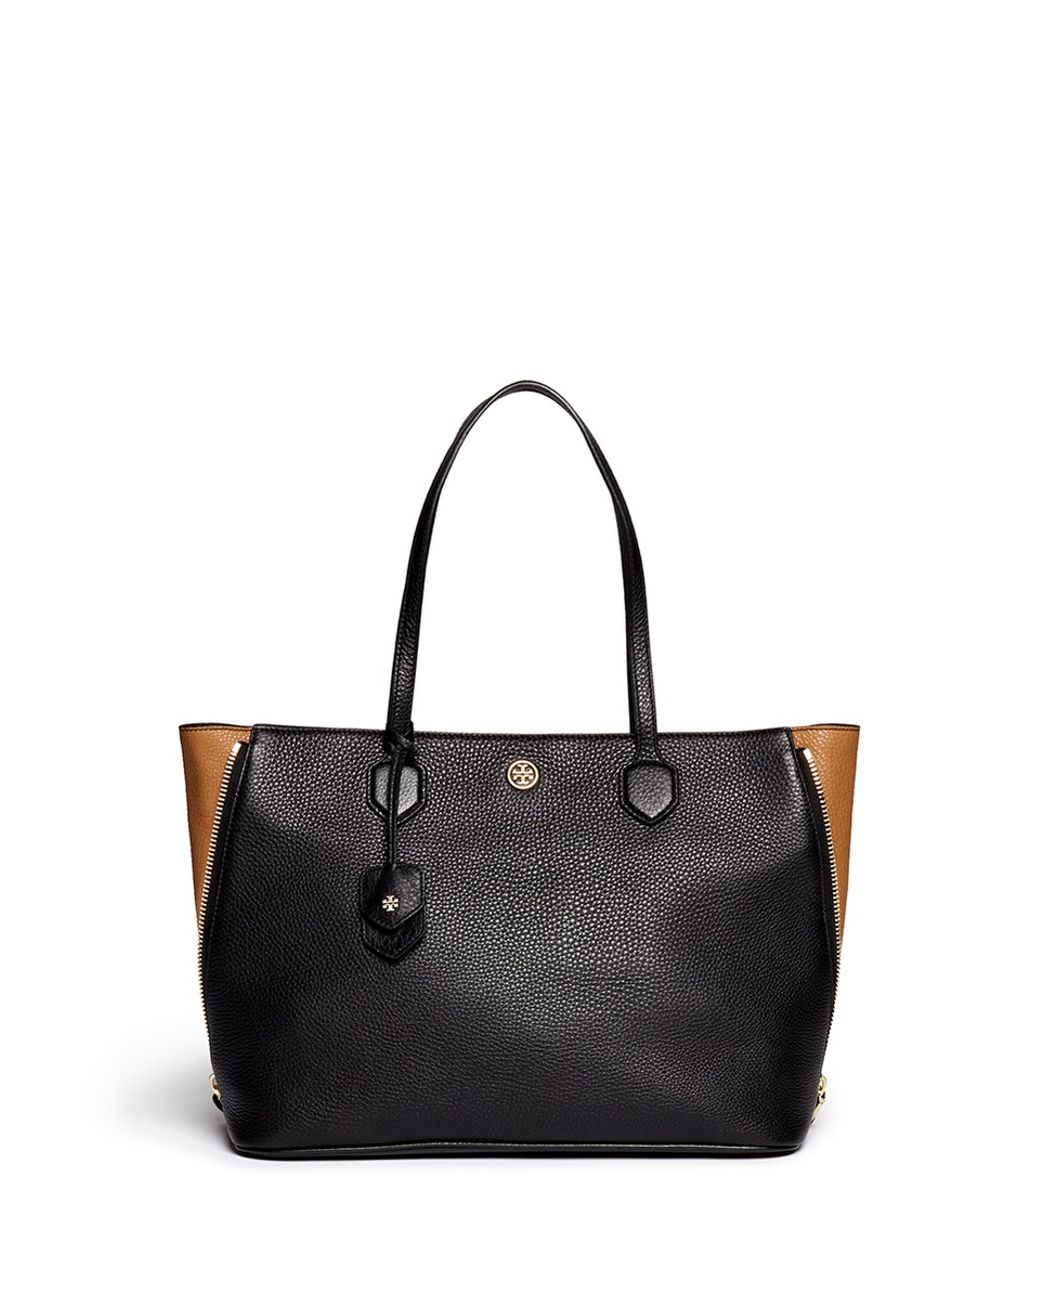 Tory Burch 'robinson' Side Zip Pebbled Leather Tote in Black | Lyst